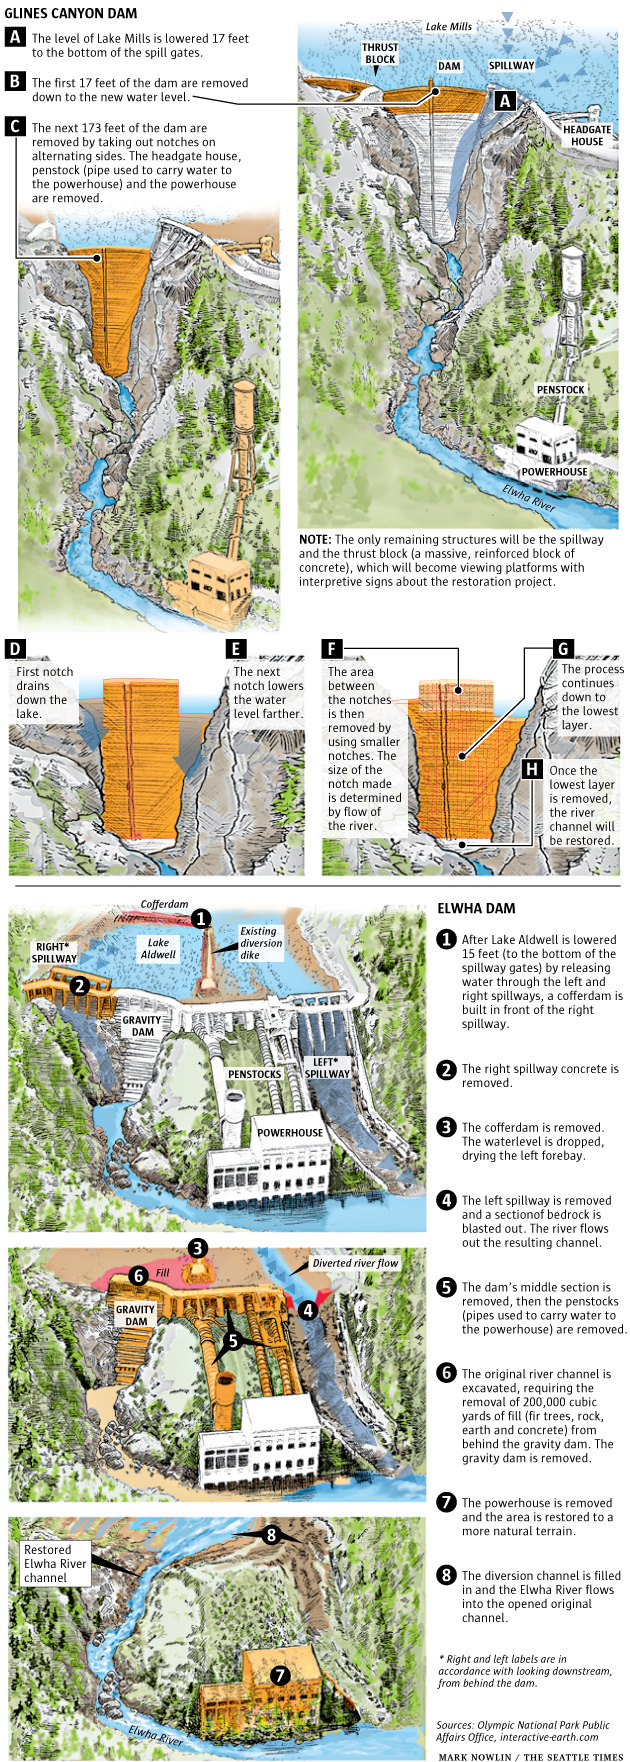 How the Elwha River dams will be removed